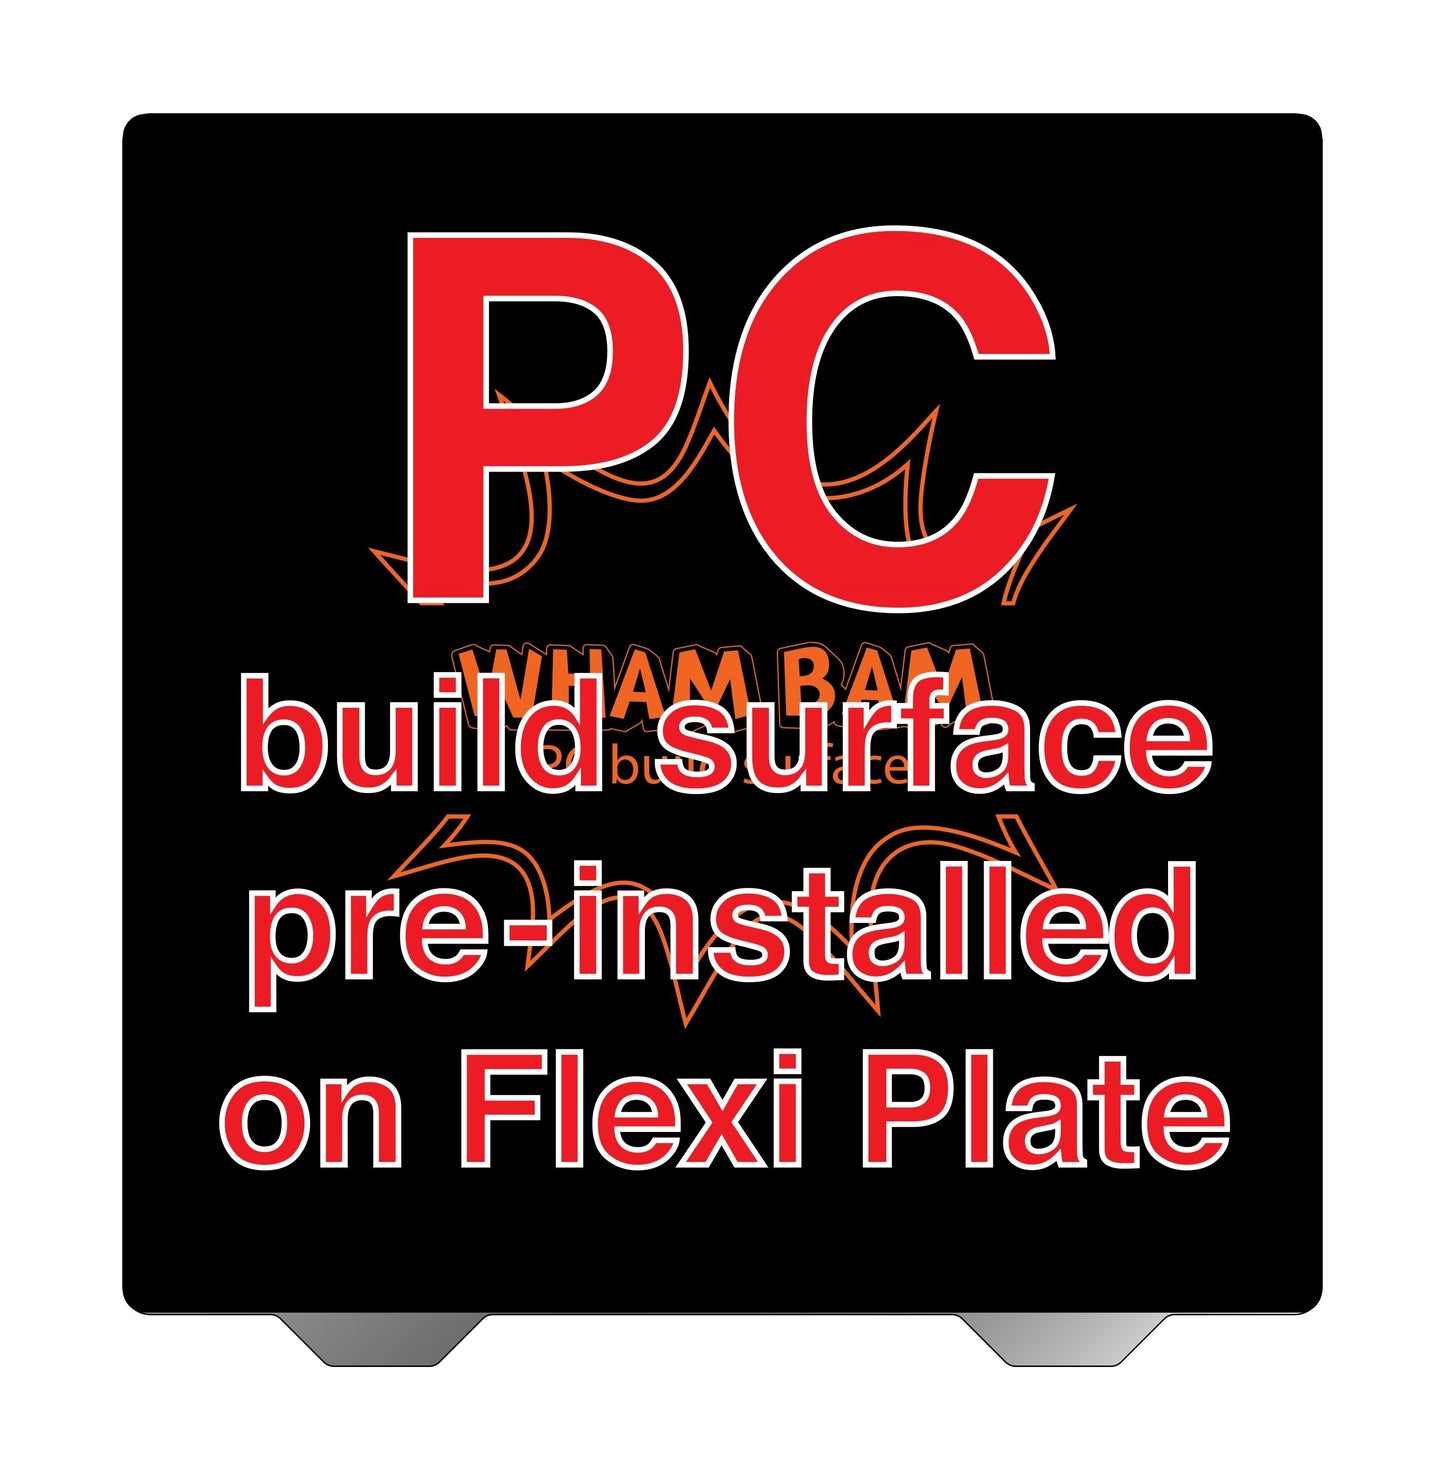 Flexi Plate with Pre-Installed PC Build Surface (Classic Black) - 377 x 370 - Creality Ender 5 Plus